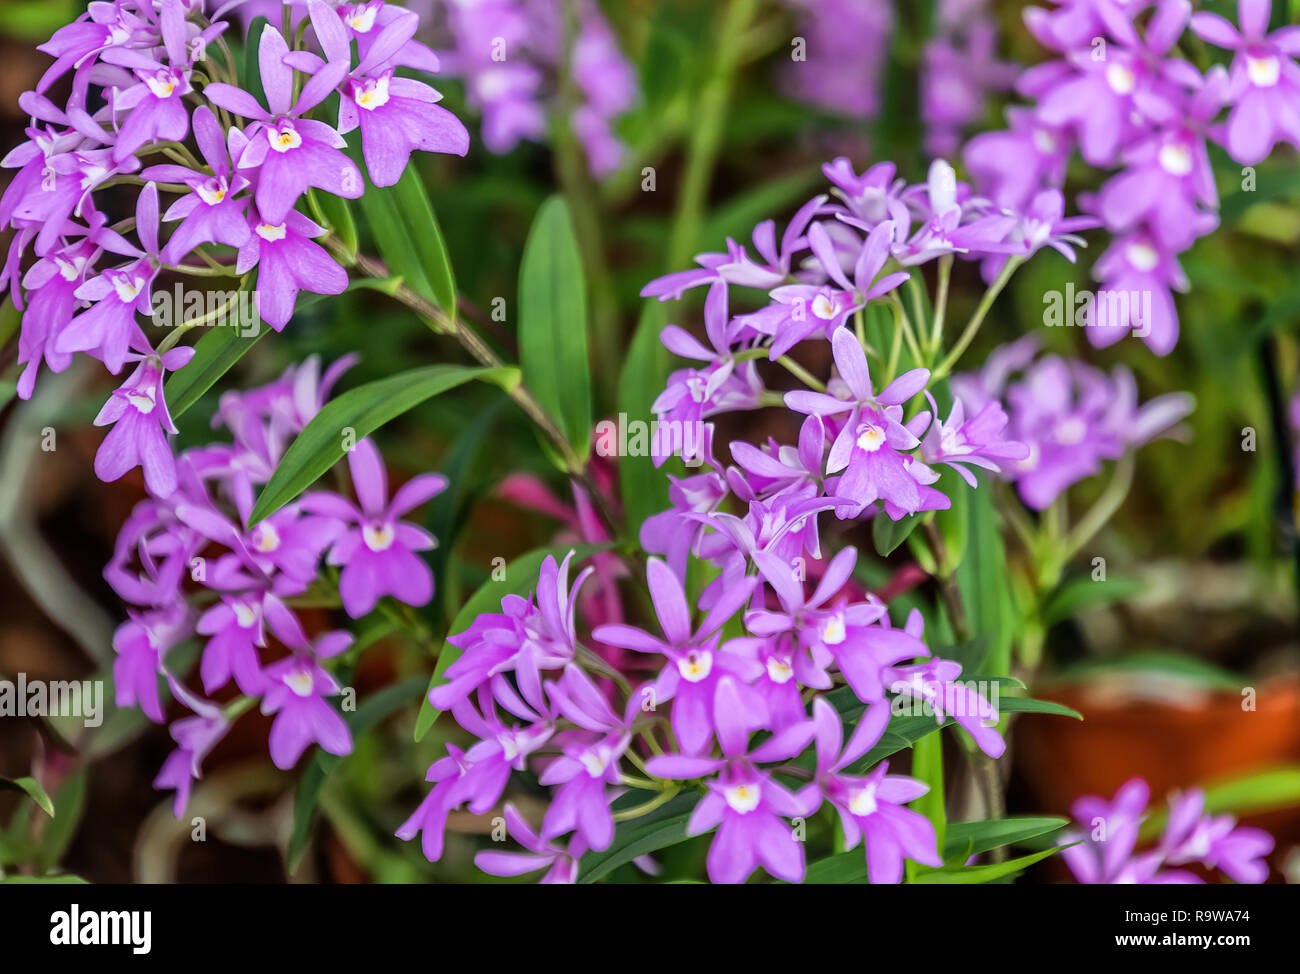 Purple Epidendrum orchid flowers - The Epidendrum orchid is known as the crucifix orchid or star orchid. Stock Photo